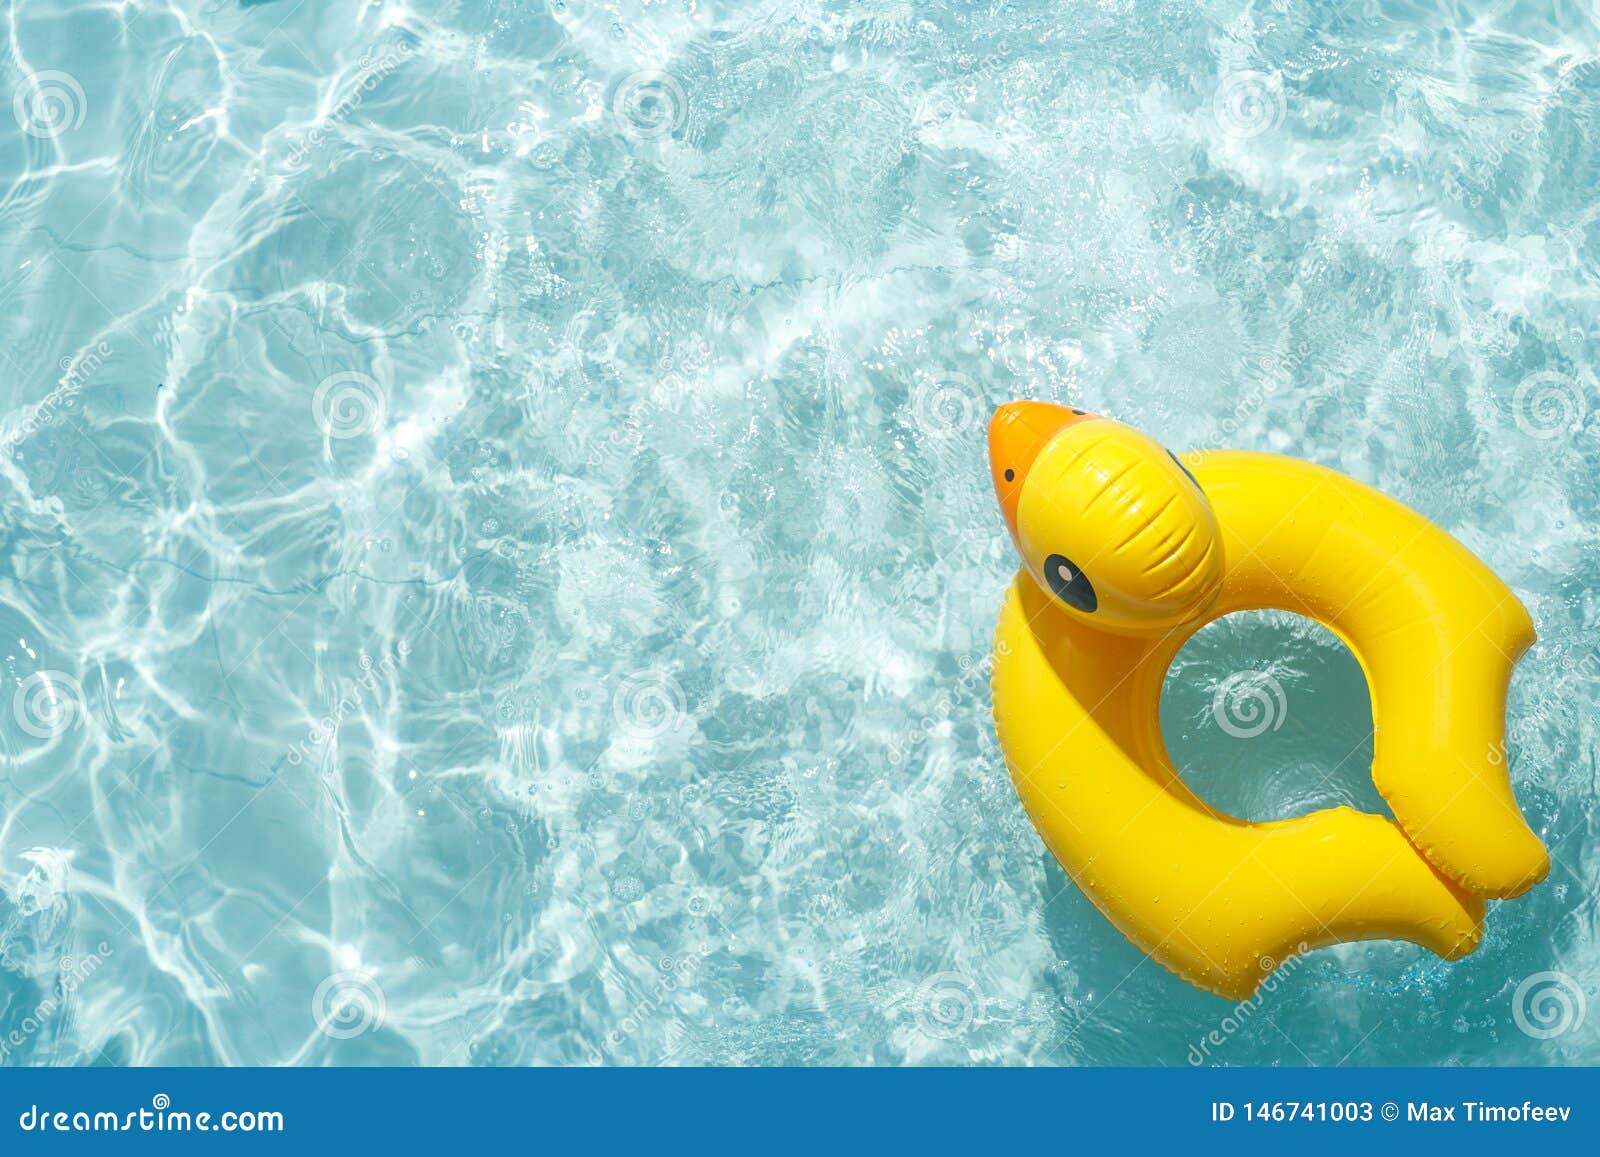 Inflatable Float Rubber Ring in the Shape of a Yellow Duckling in Blue ...